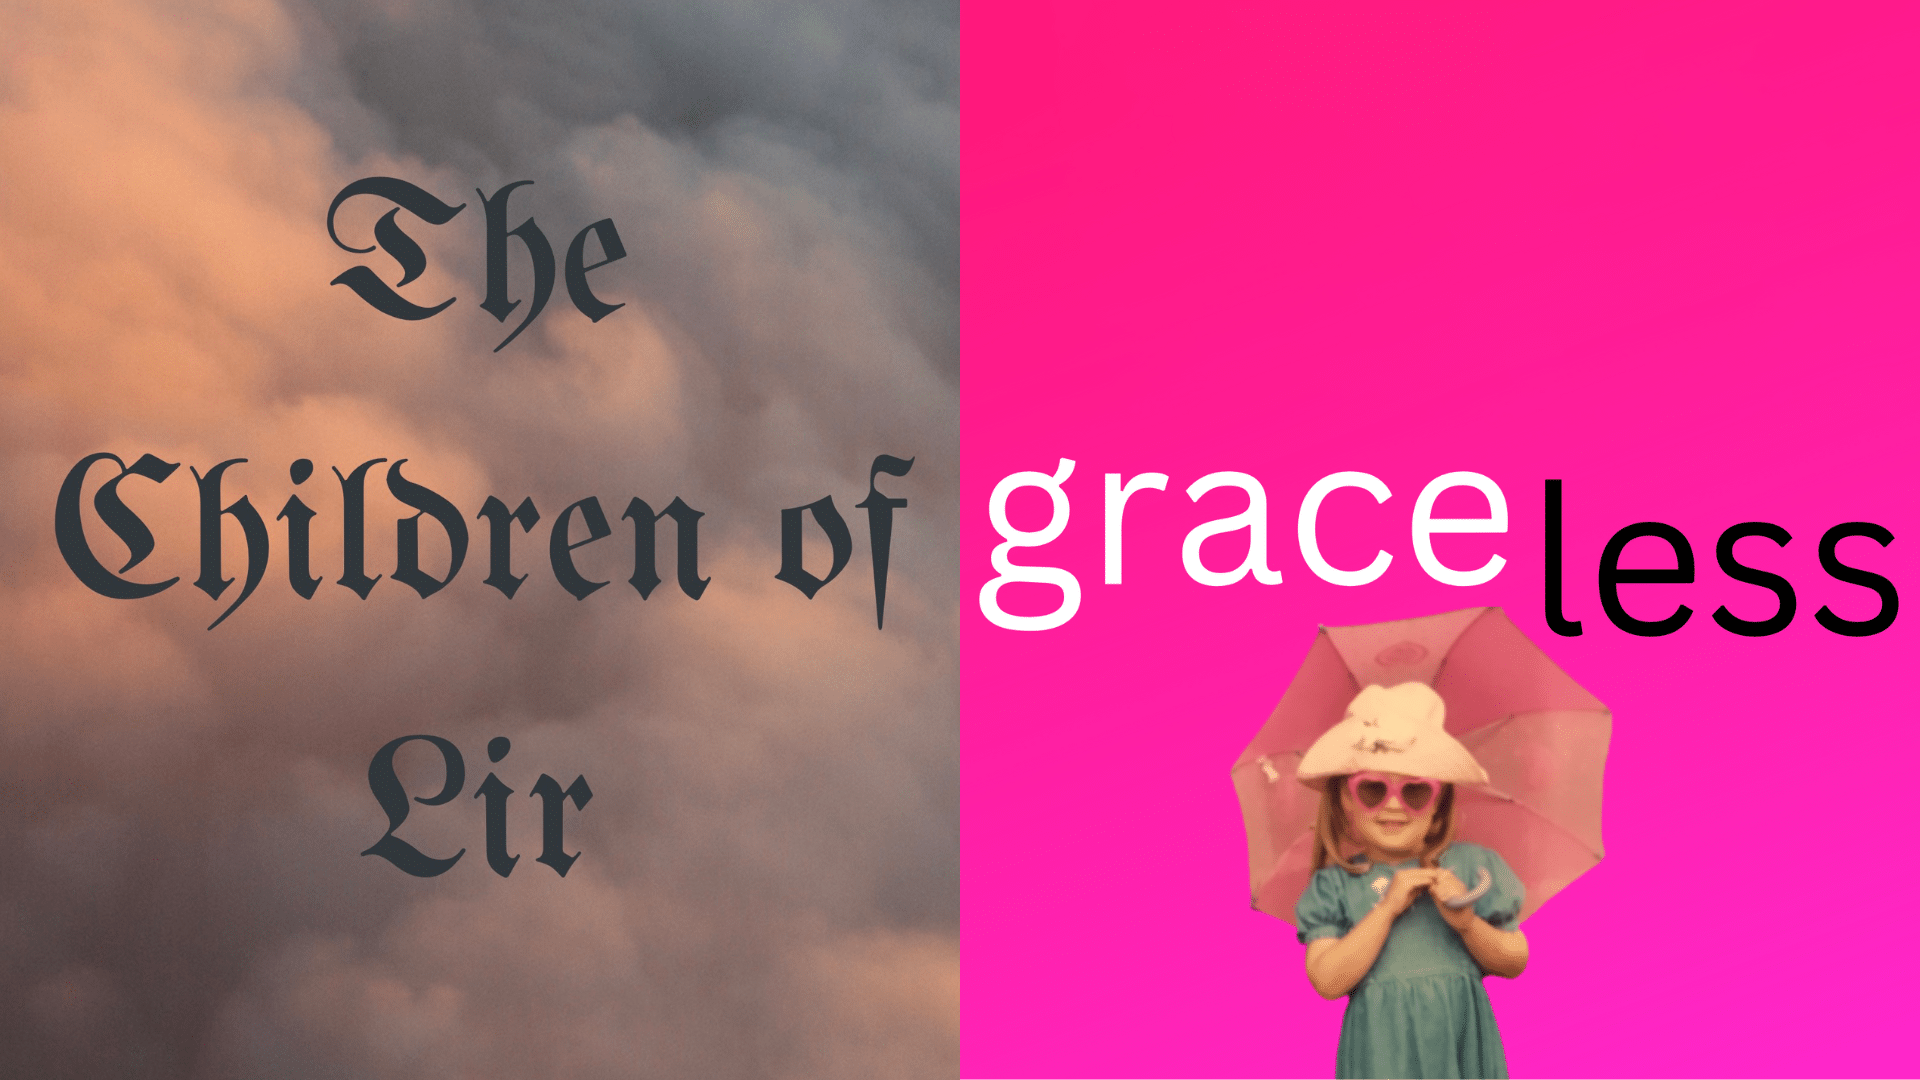 Futures Festival 2023 - Double Bill promotional image - On the left: The Children of Lir show artwork. Orange coloured clouds during a sunset. Black text reads: 'The Children of Lir'. On the right: Graceless shot artwork. Pink gradient background. A cut out from vintage photo depicting a young girl wearing a blue dress, heart-shaped sunglasses, white hat and holding an umbrella. Above the young girl, text reads: 'graceless'.